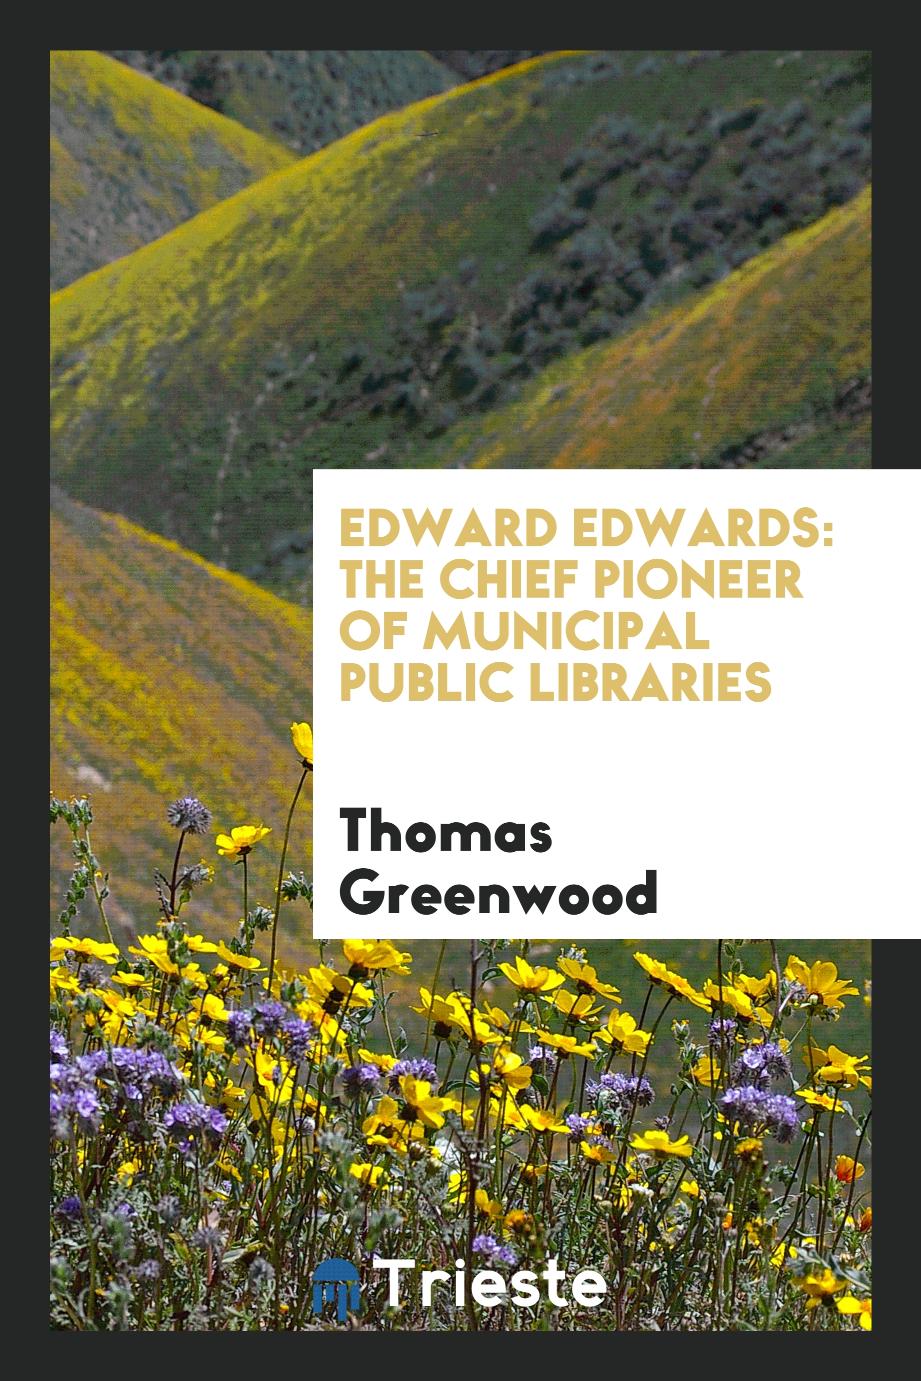 Edward Edwards: The Chief Pioneer of Municipal Public Libraries